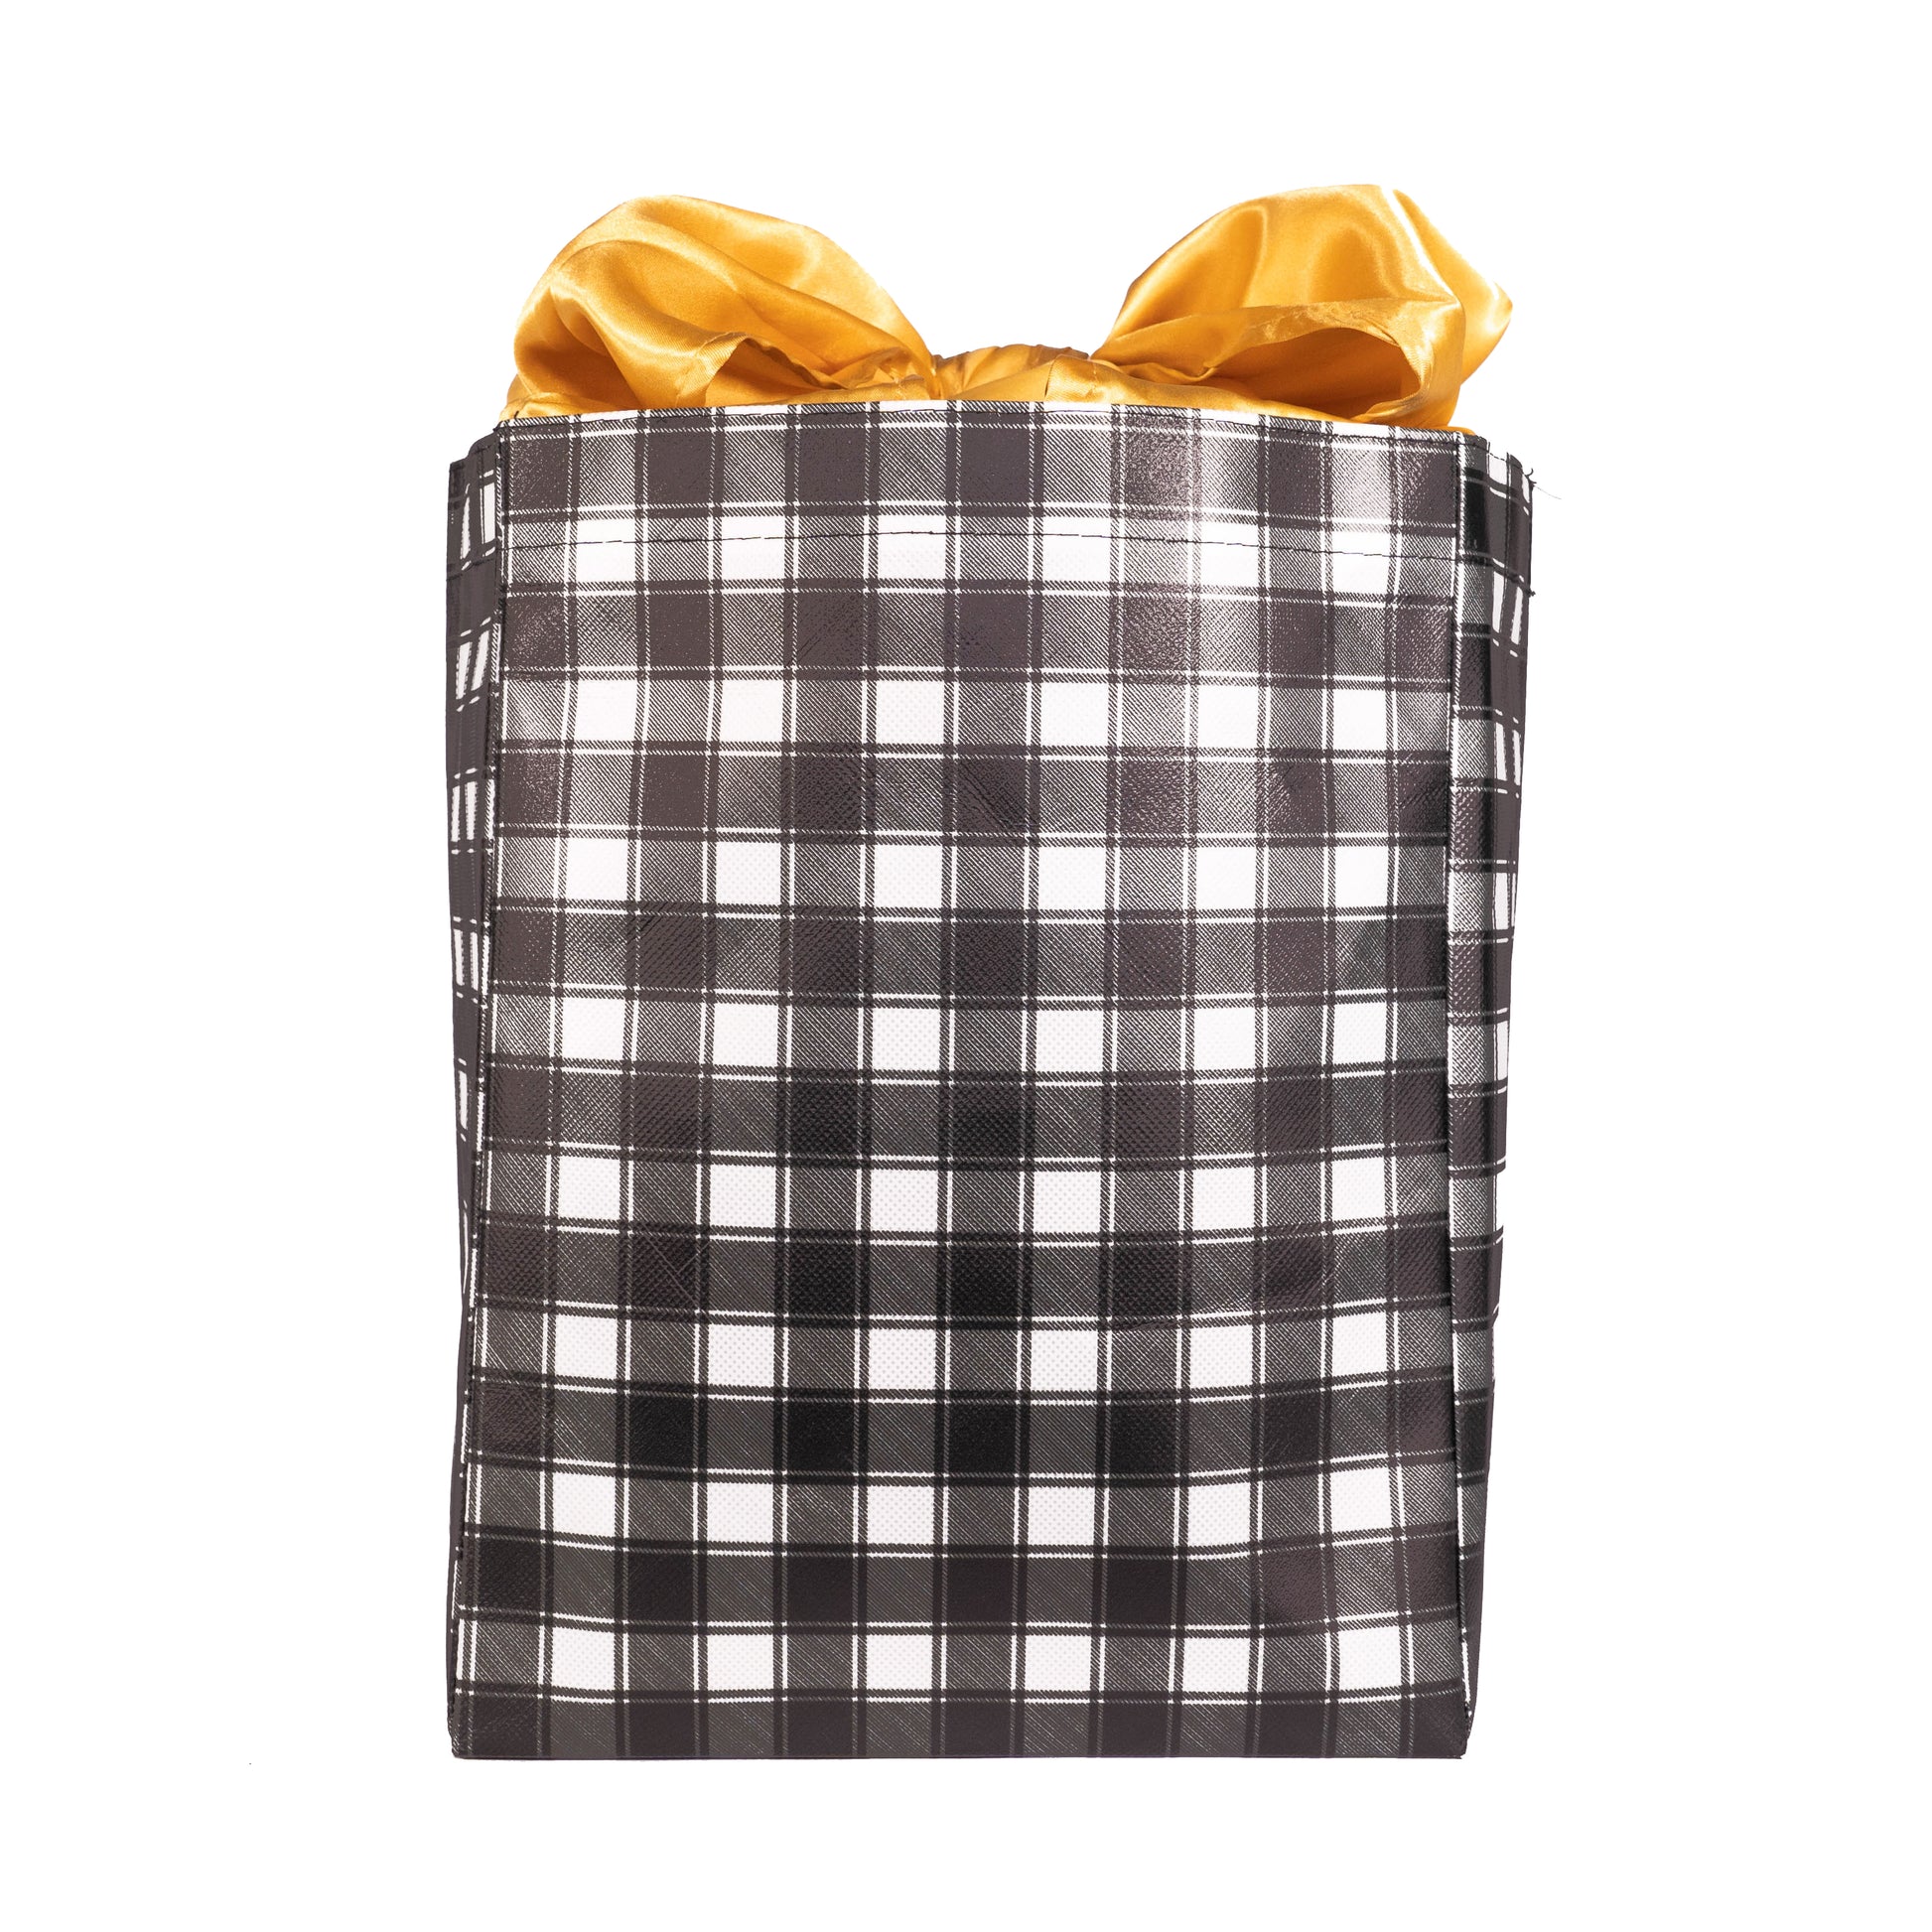 IRREGULAR - Black and White Buffalo Check with Gold Satin Bow, fold, store, and reseal with our reusable gift bag, satin closure makes for an eco-friendly gift bag - EverWrap